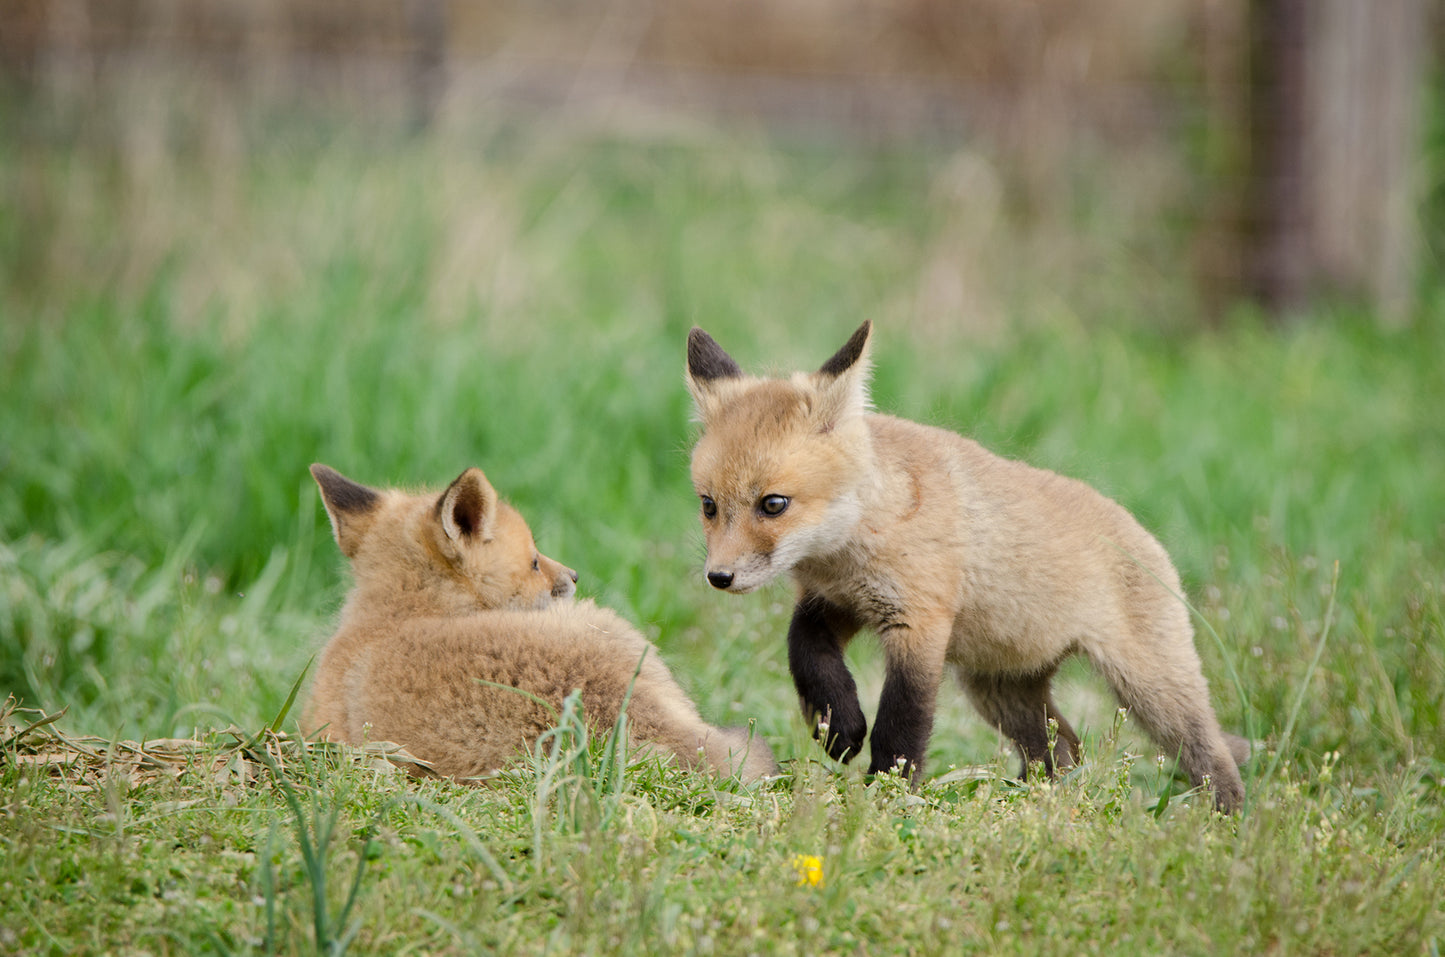 Large Bedroom Canvas Art: Fox Pups / Kits - Coming to Get You Animal / Wildlife Photograph Fine Art Canvas Wall Art Prints